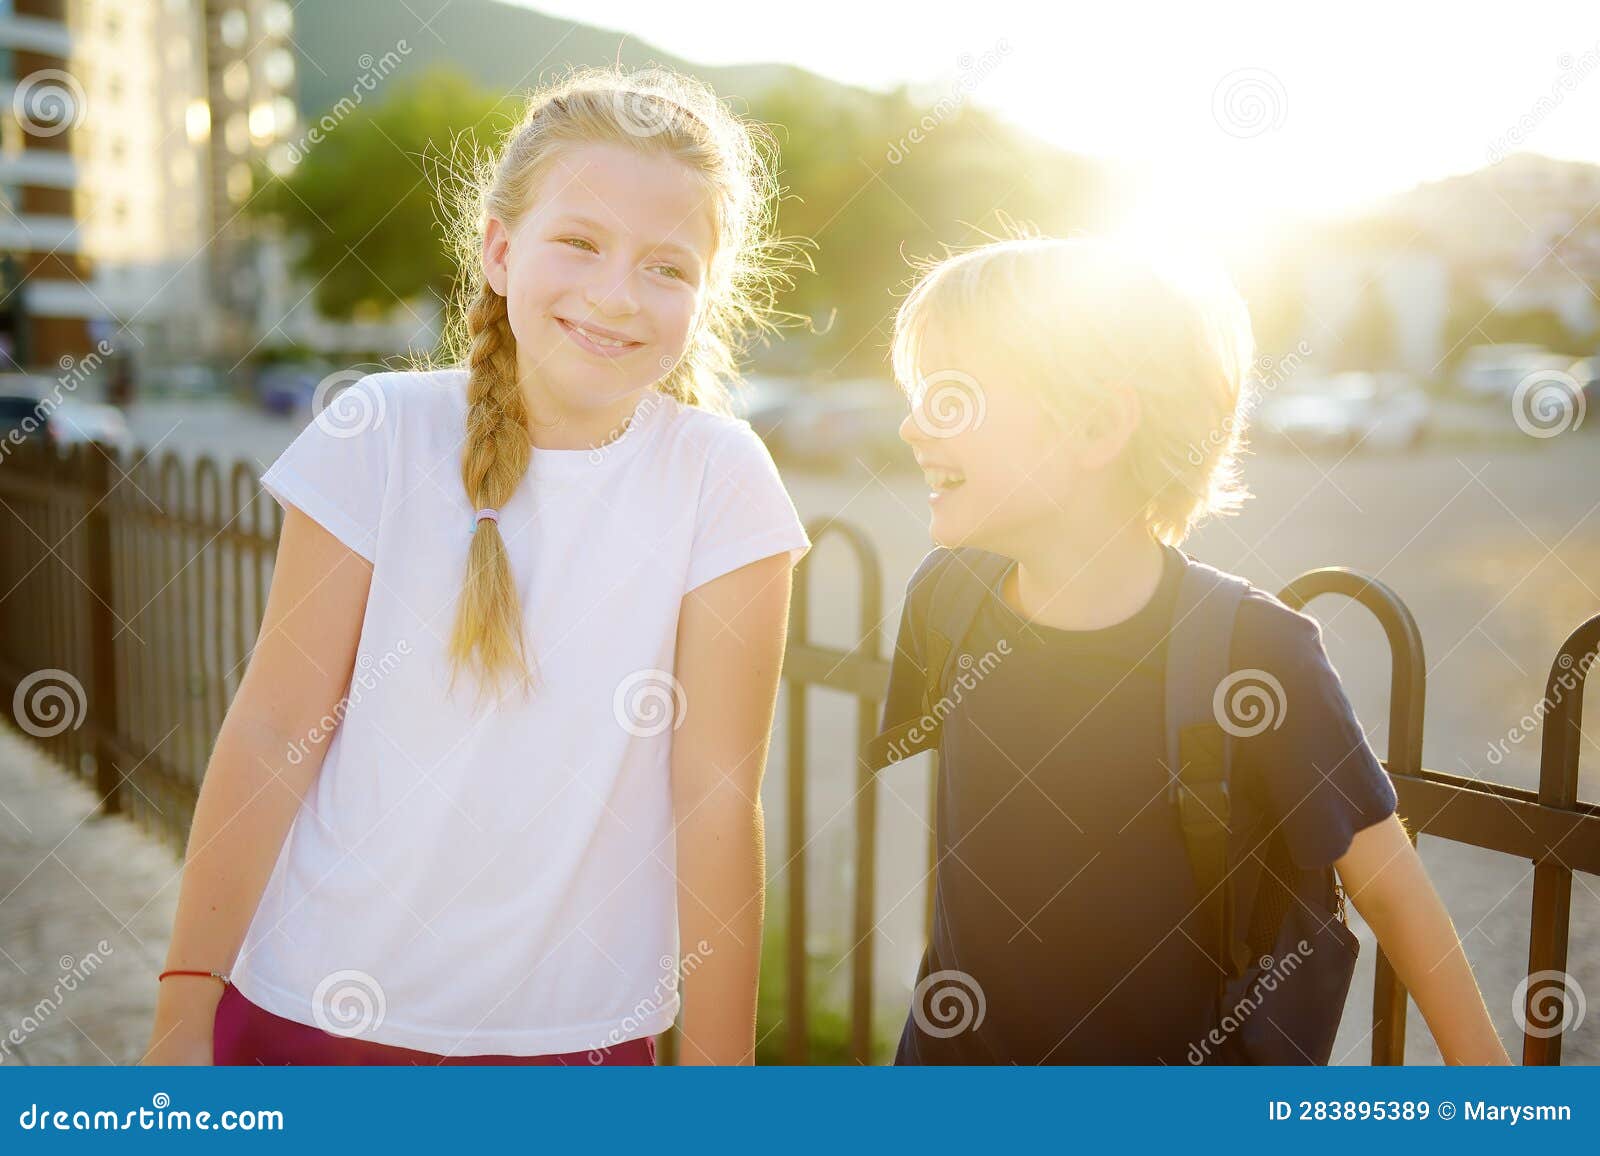 portrait of a happy preteens girl and boy on a city street during a summer sunset. friends are walking together. first love